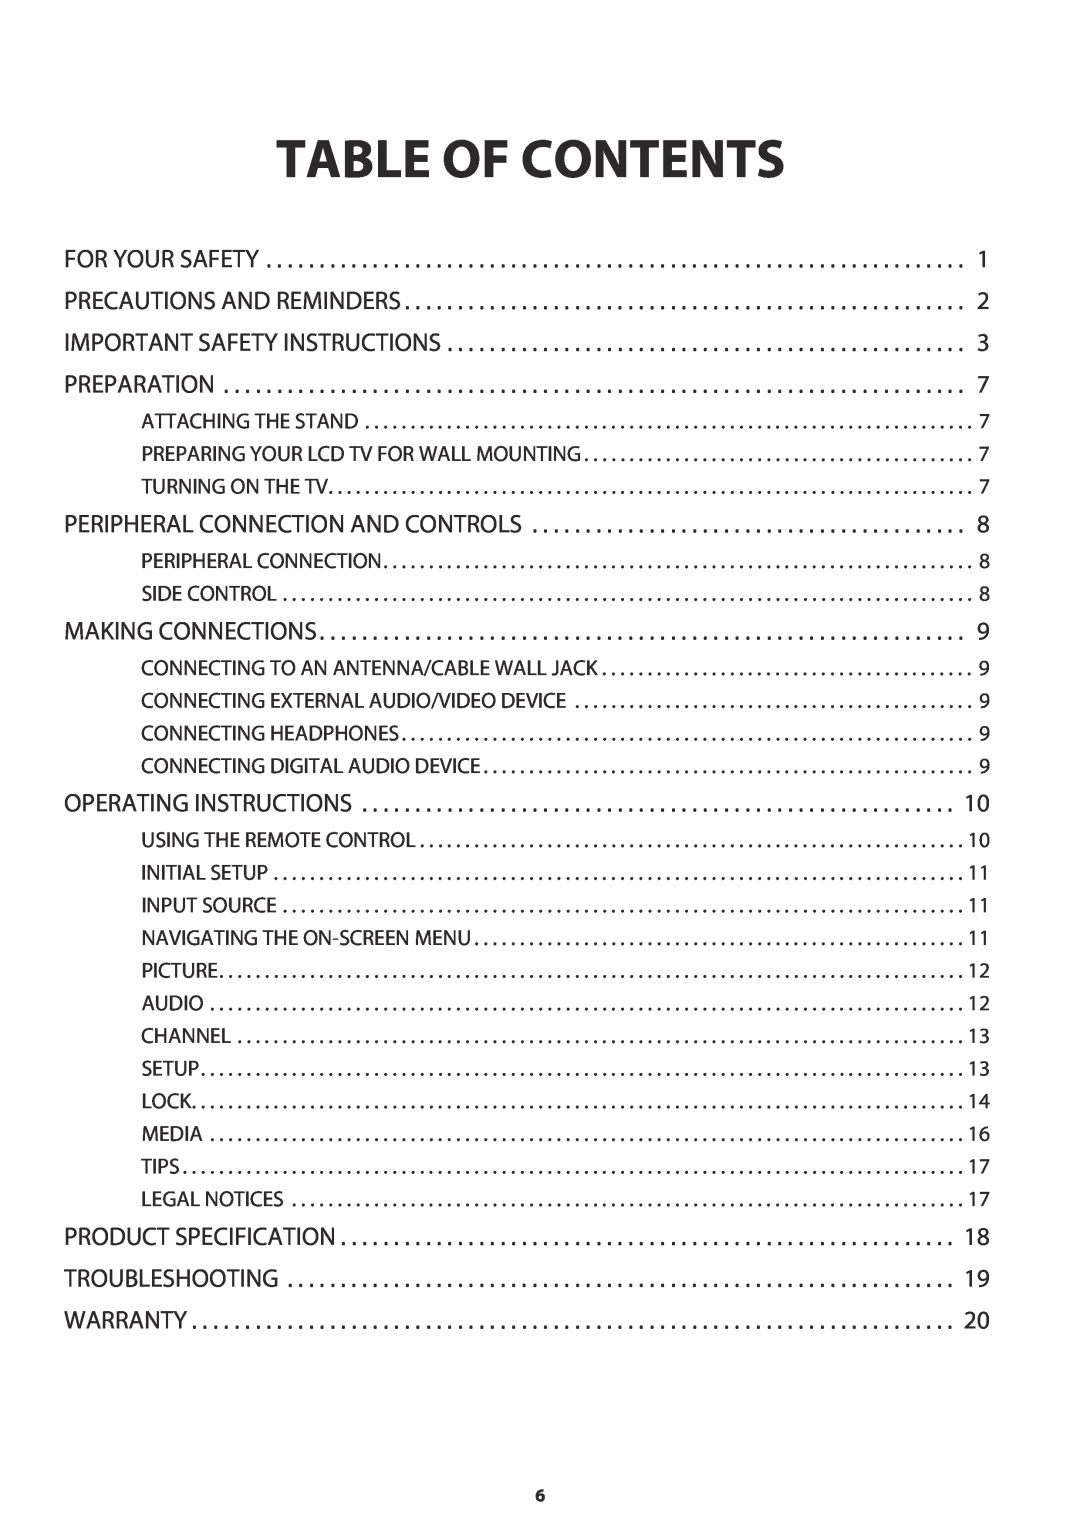 Haier 24D2000 manual Table Of Contents, Peripheral Connection And Controls, Making Connections, Operating Instructions 